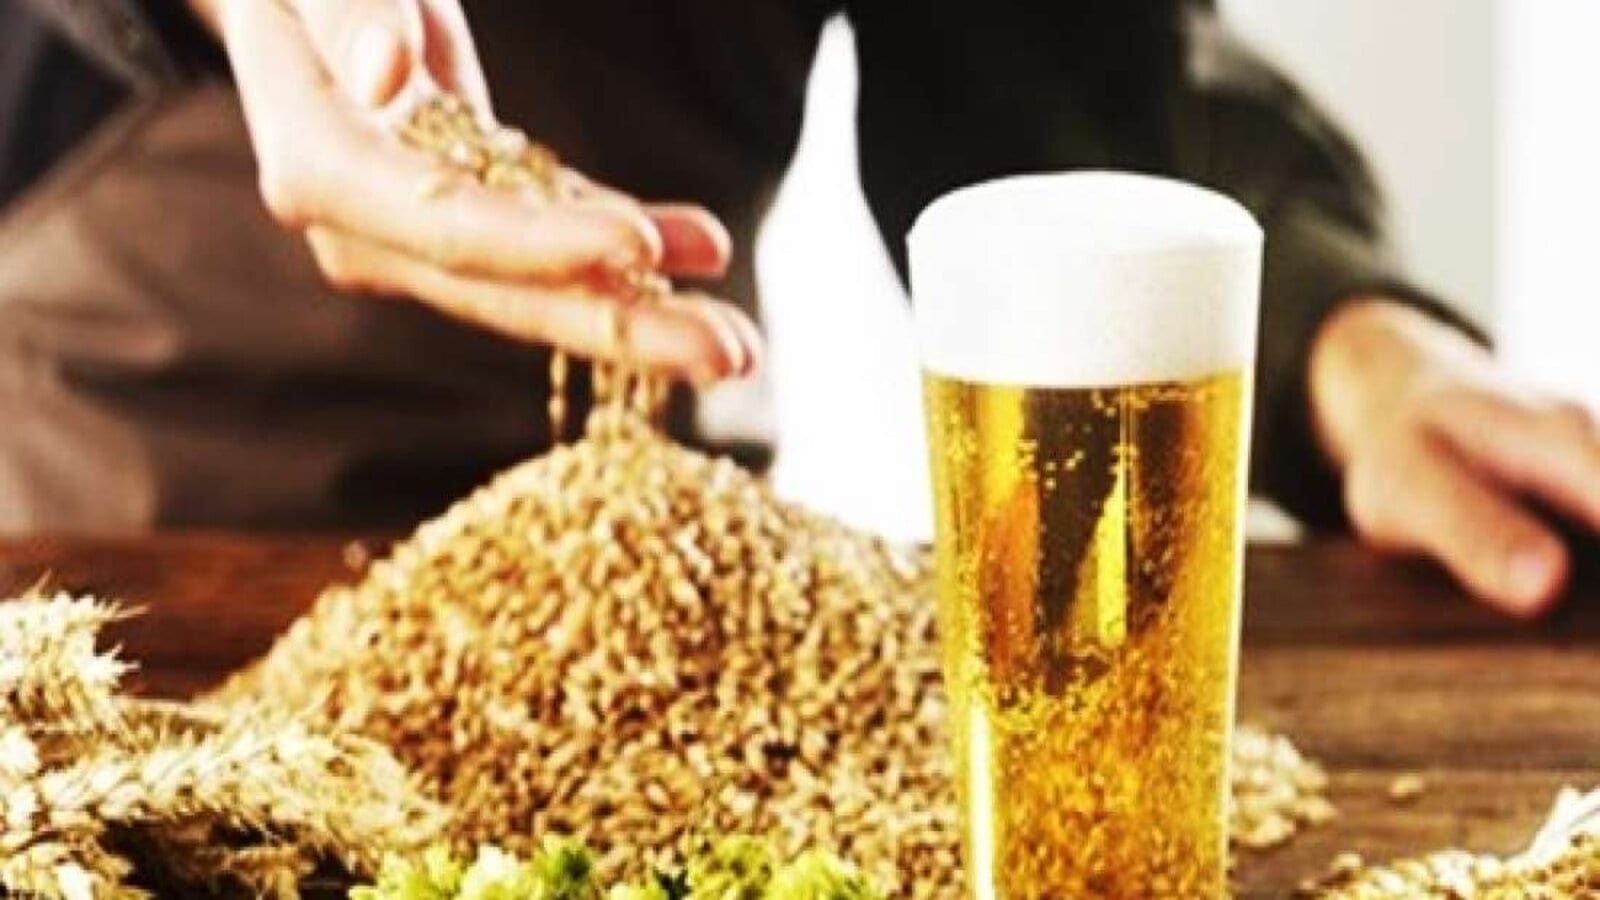 DSM’s new enzyme to enable use of unmalted grains in beer making